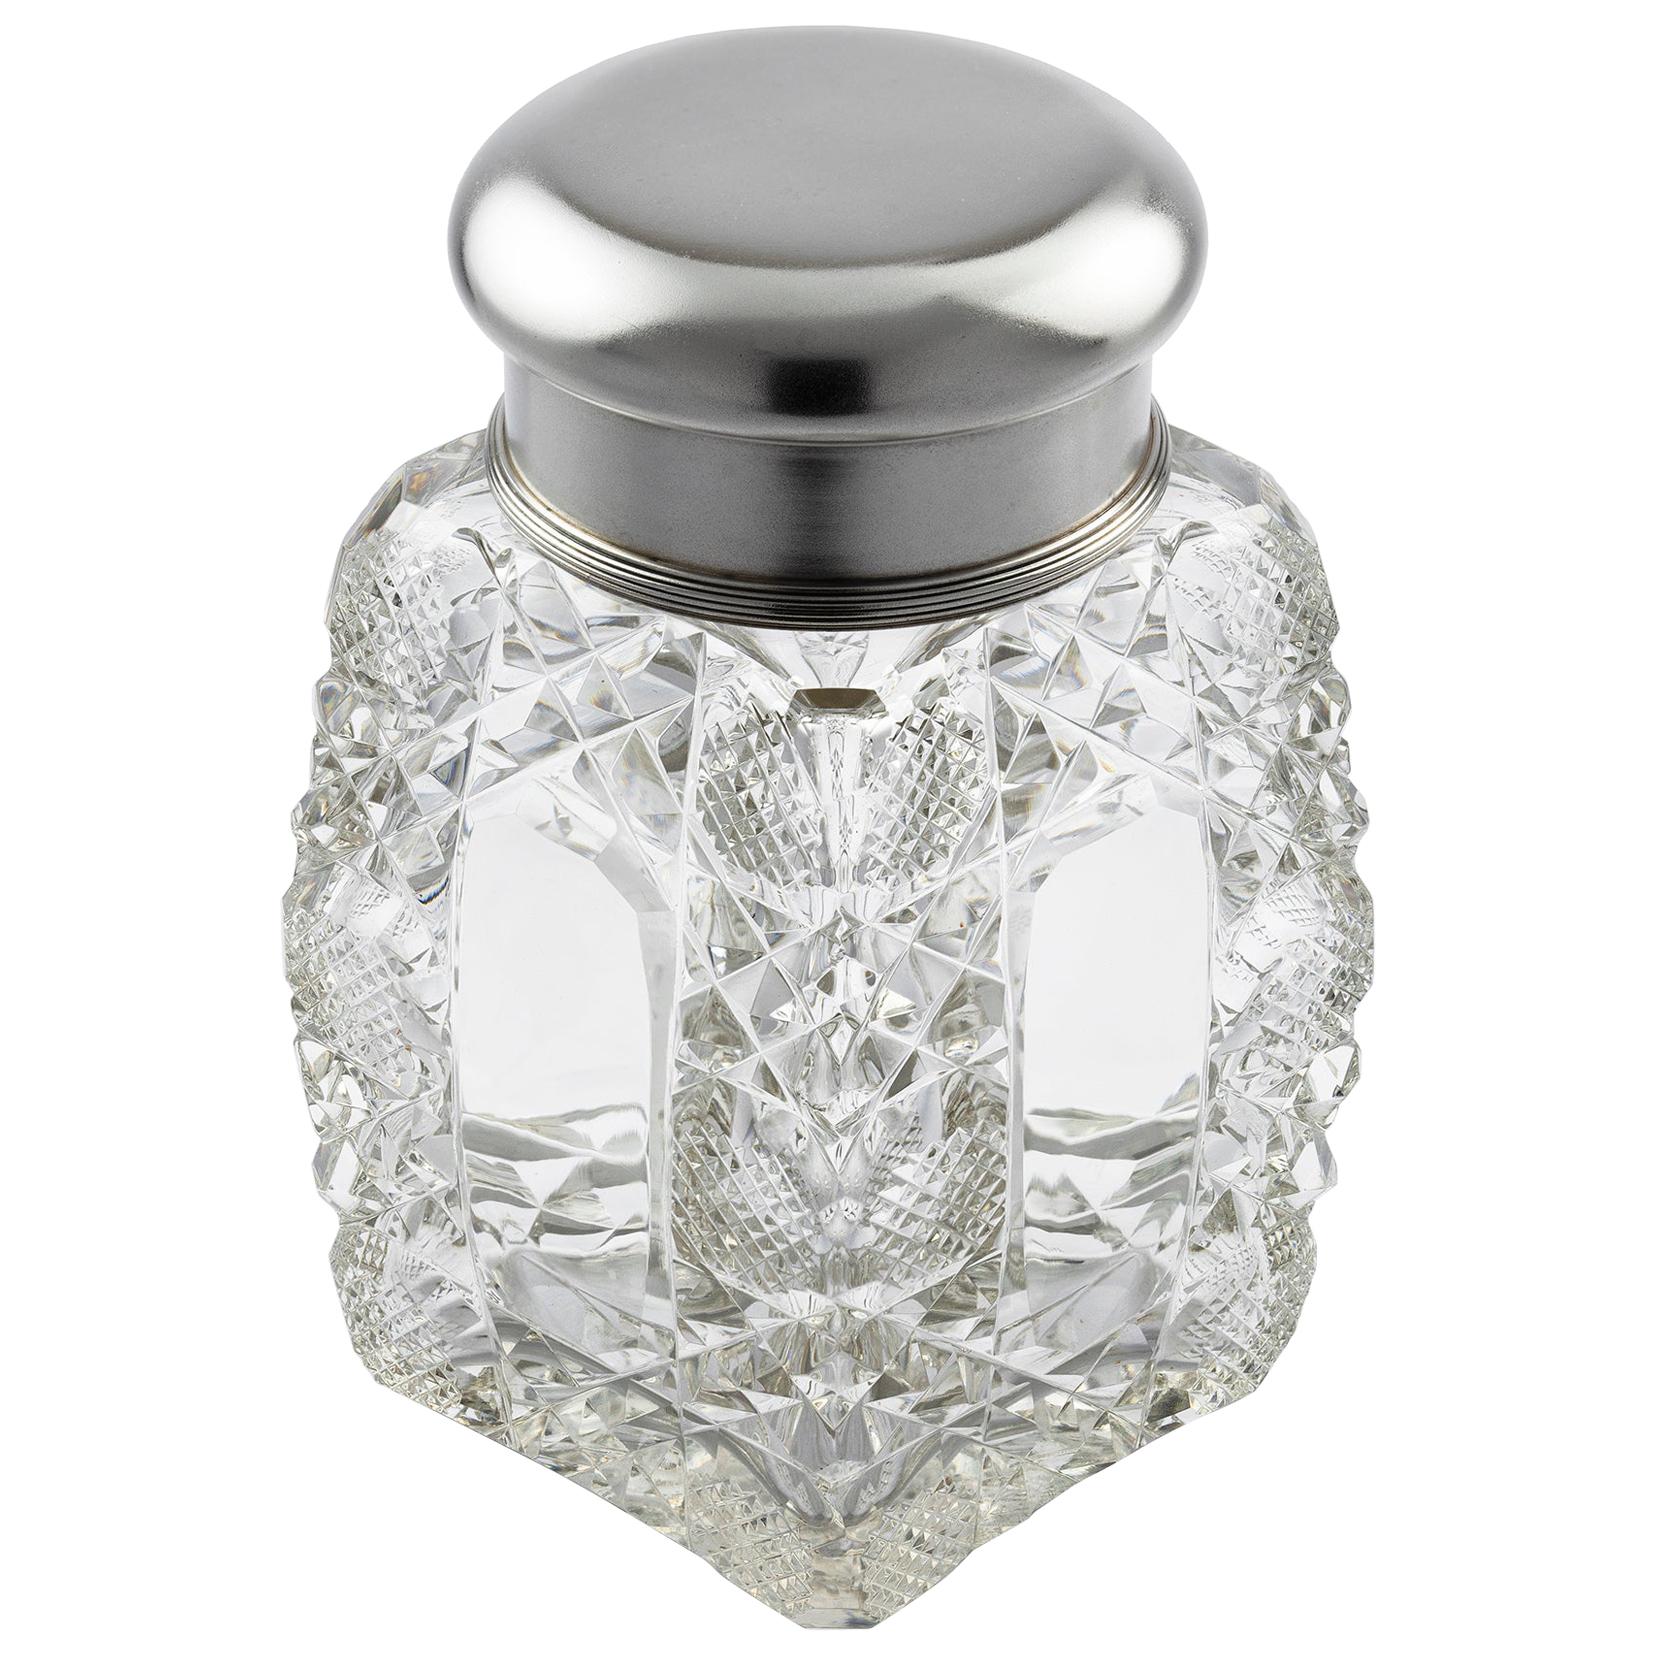 Fabergé Glass Bottle with Silver Lid